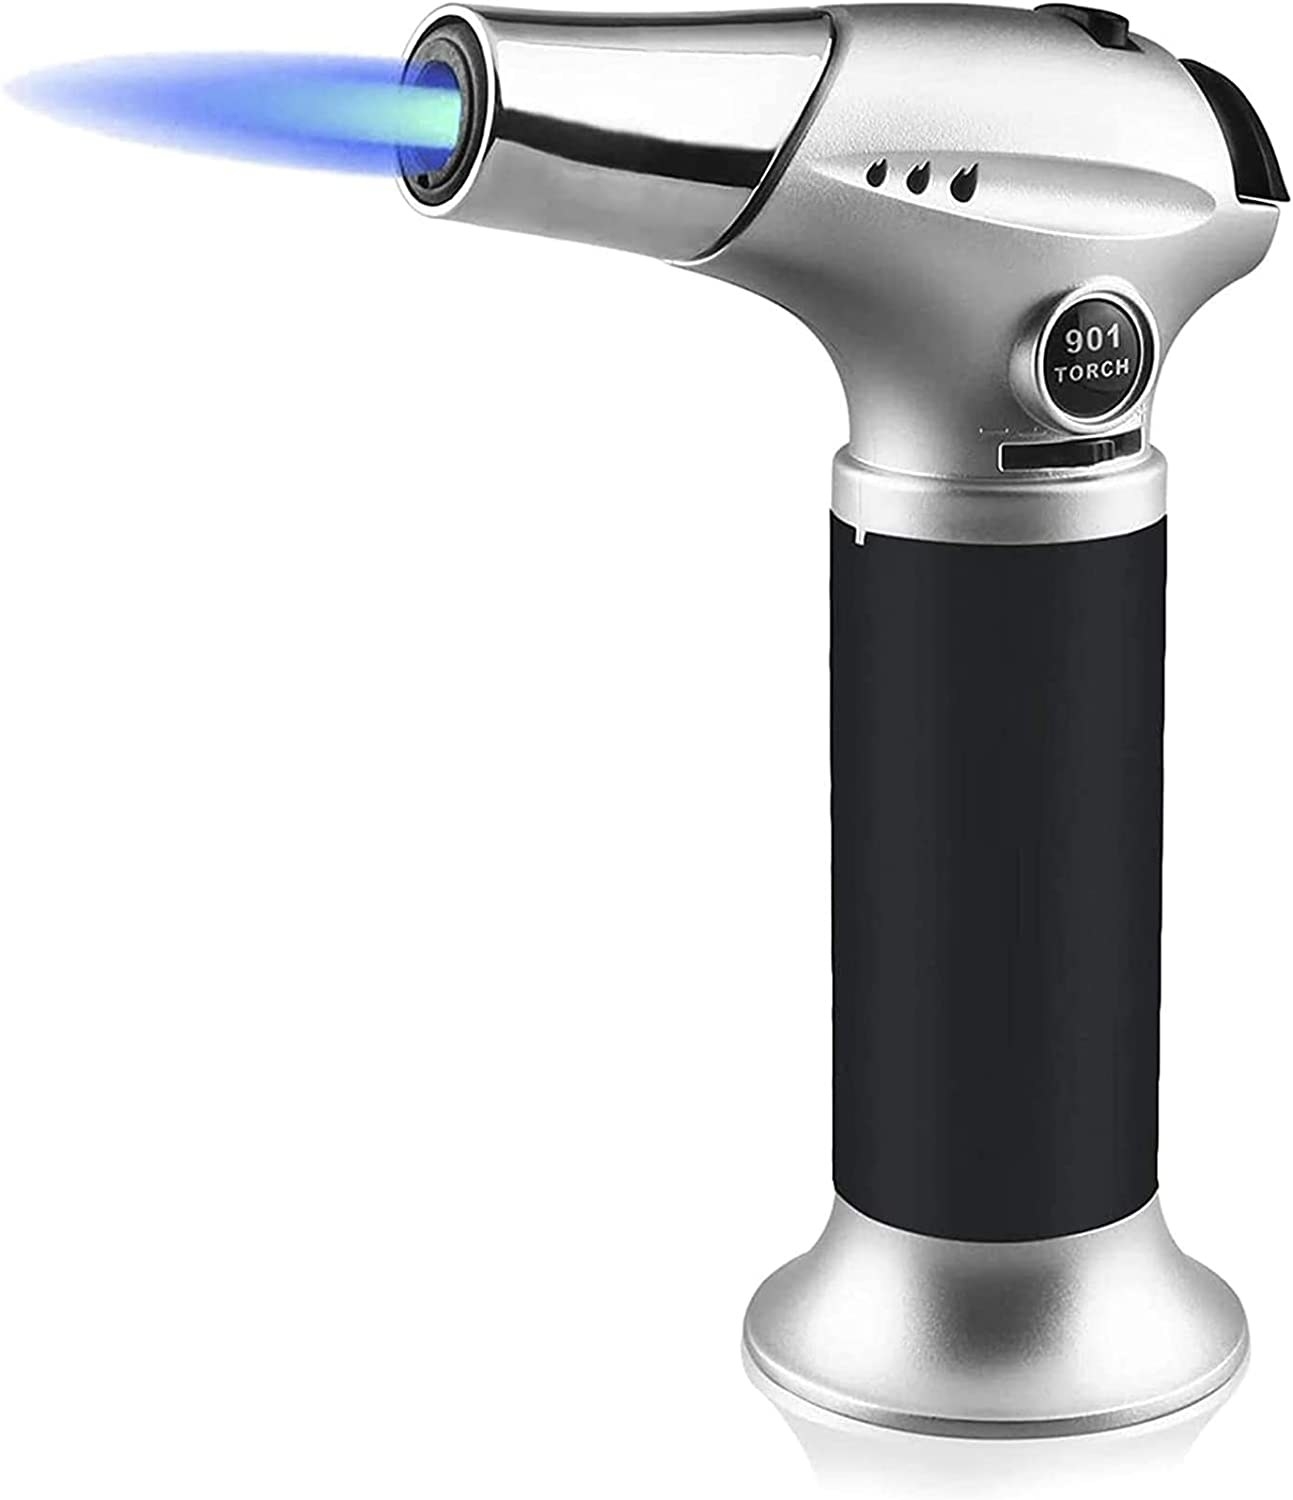 the torch on a white background